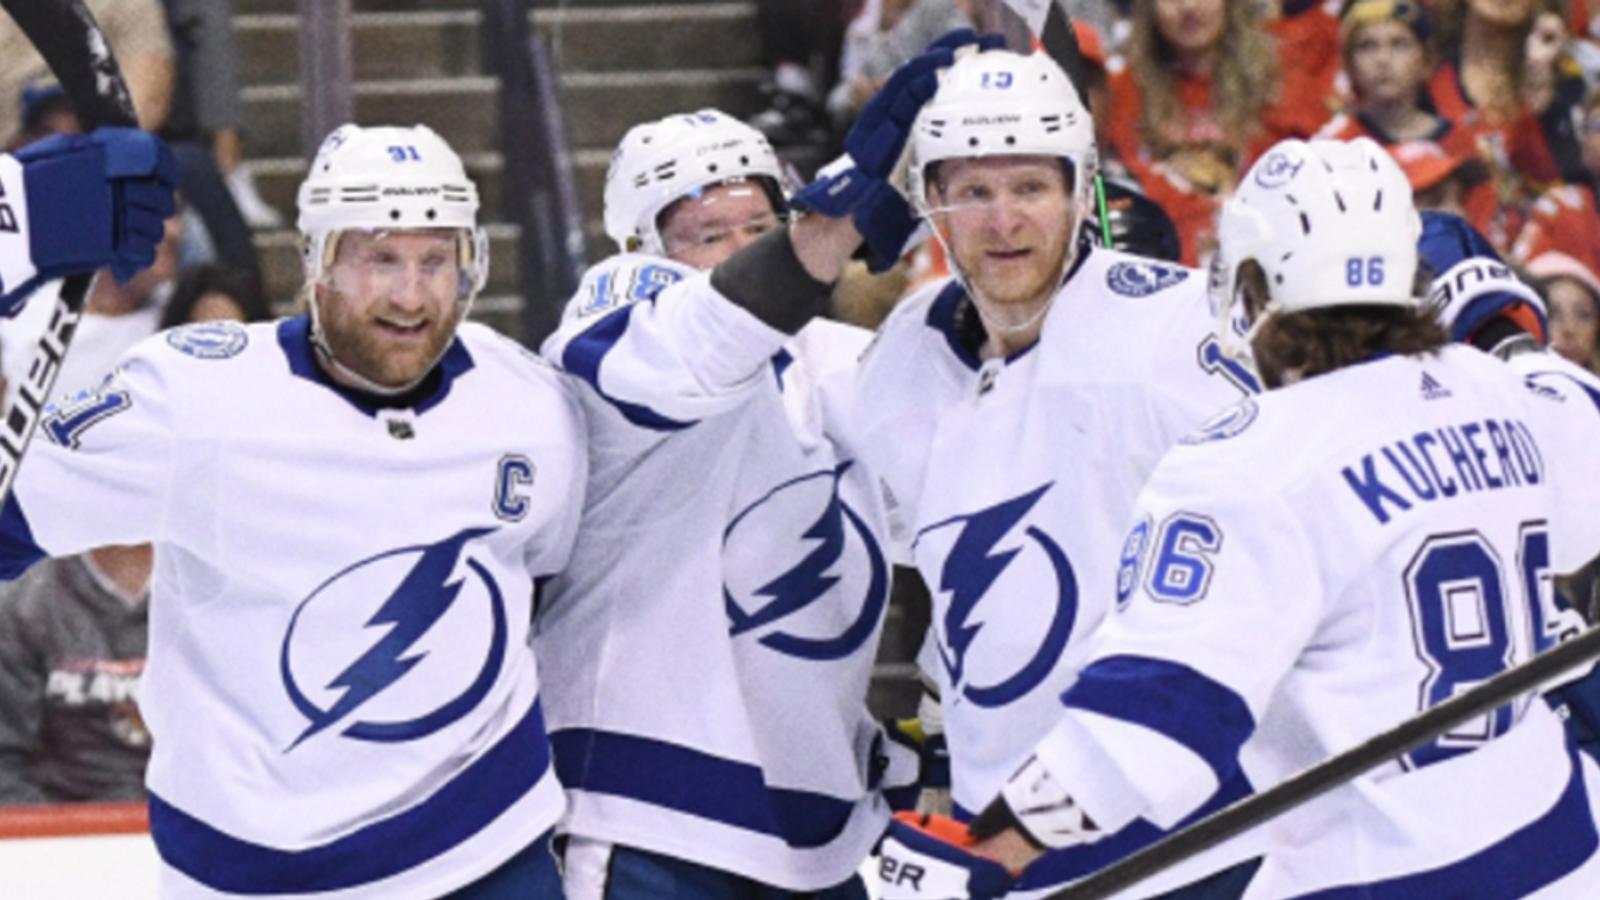 Lightning score with 4 seconds left in regulation to win Game 2